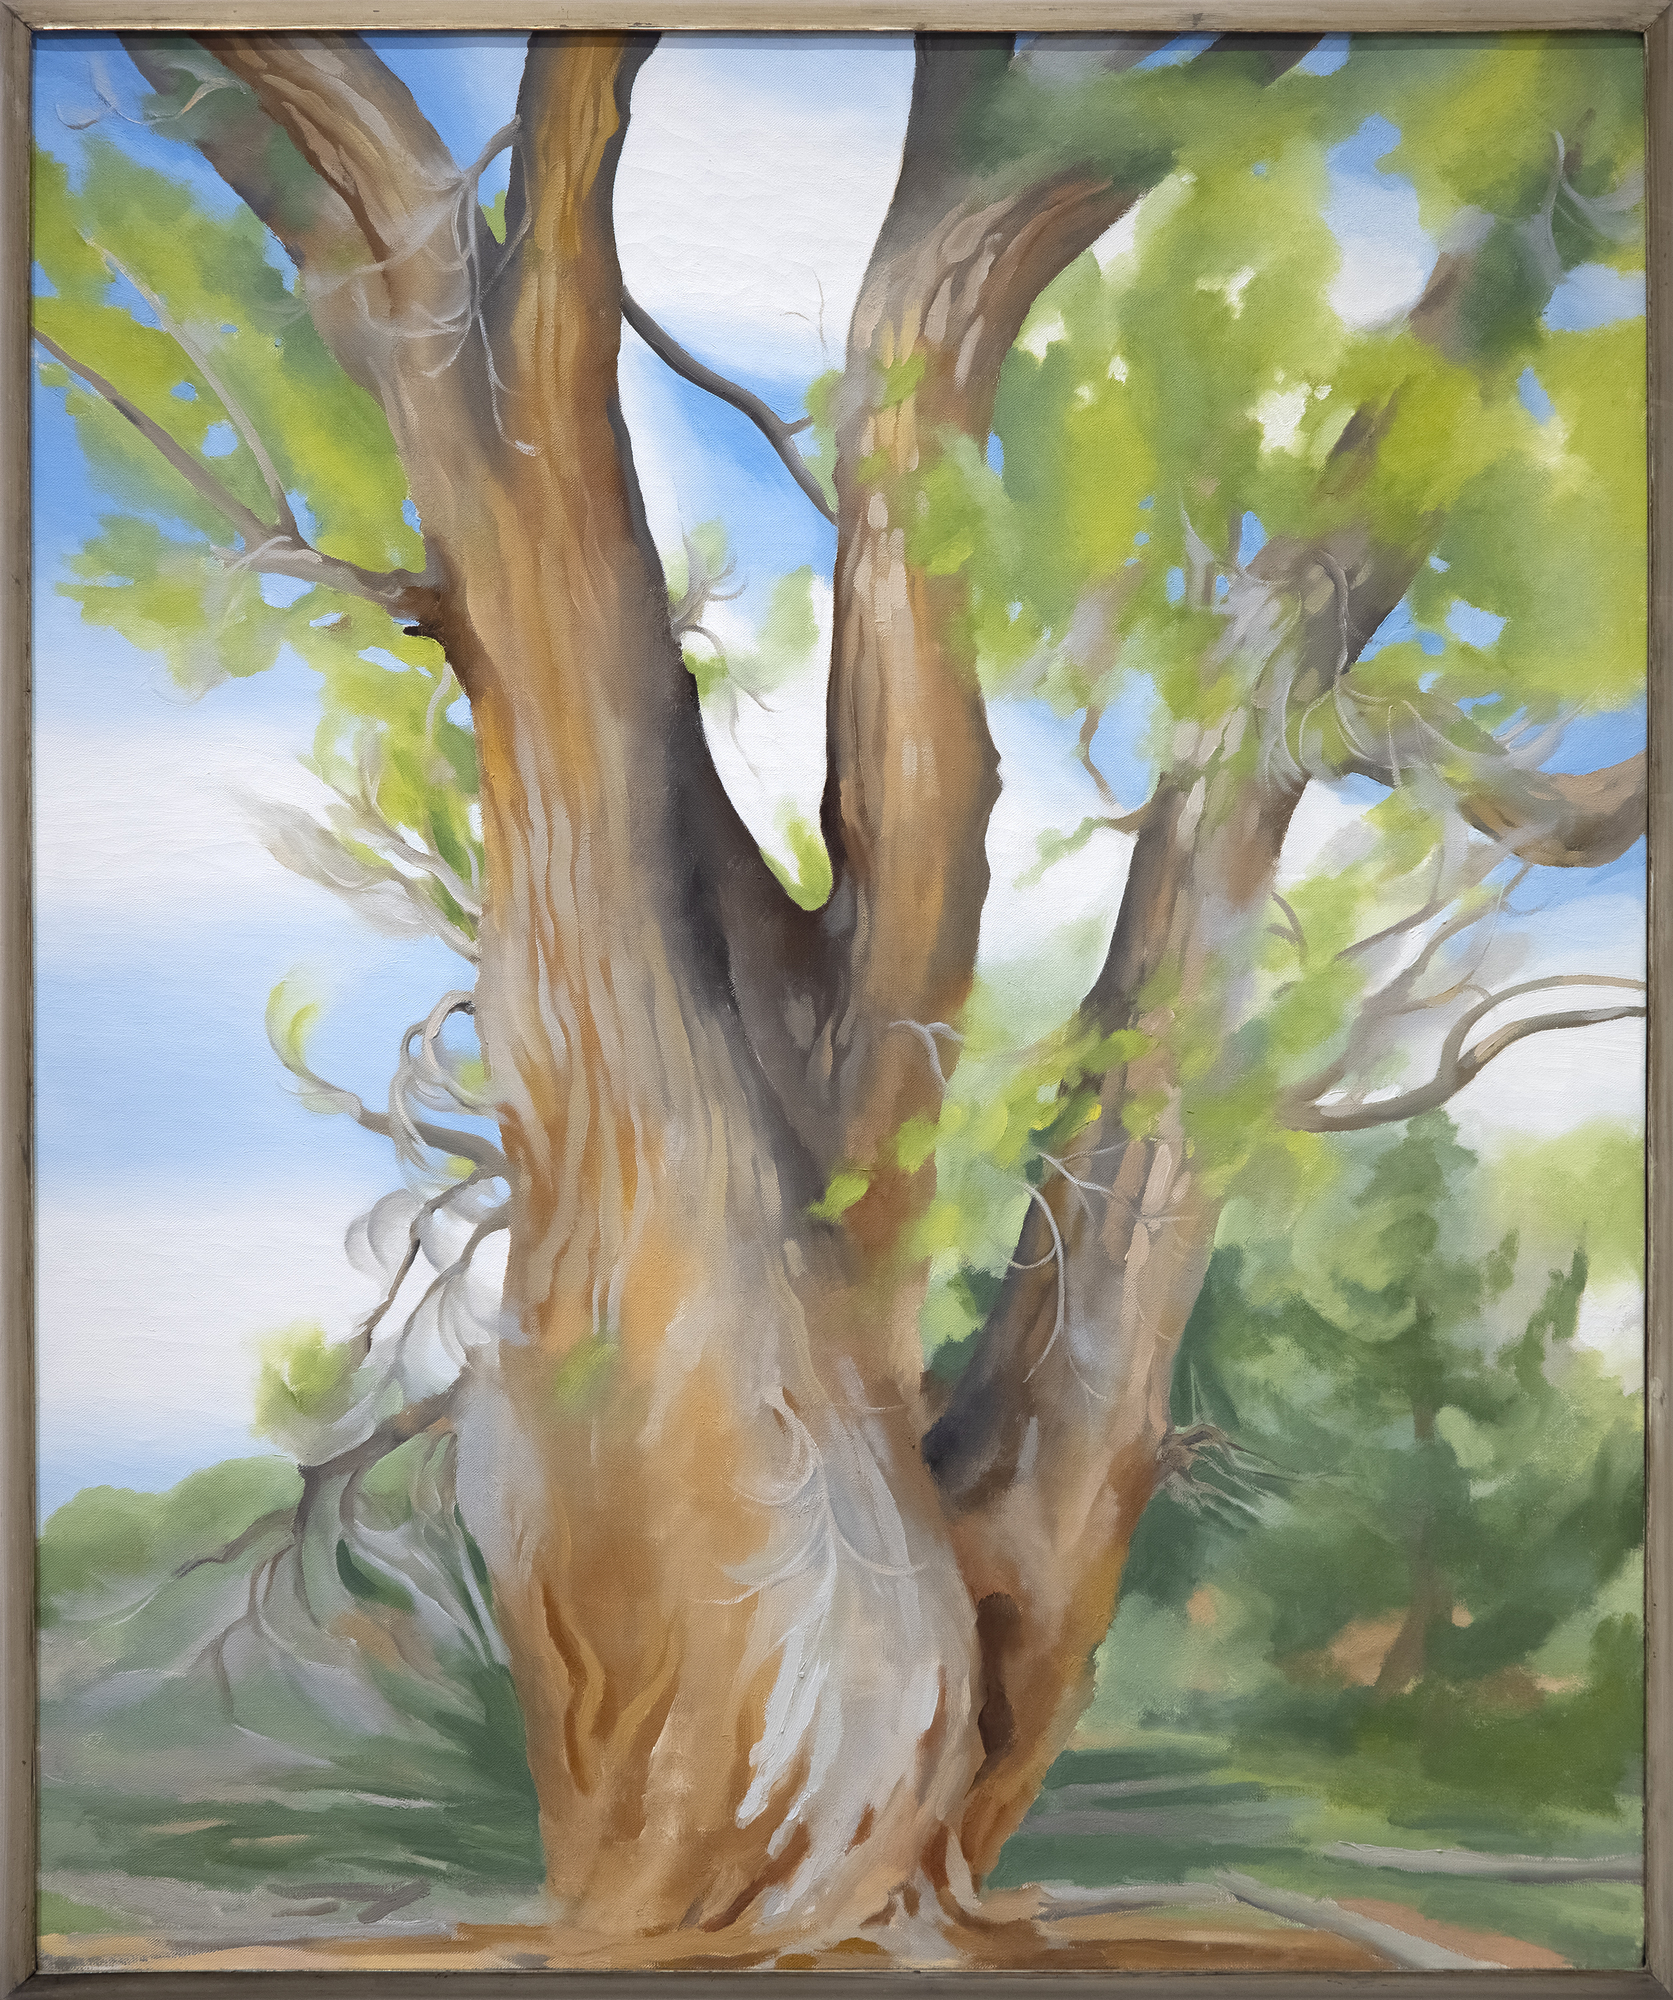 Cottonwood Tree (Near Abiquiu), New Mexico (1943) by celebrated American artist Georgia O’Keeffe is exemplary of the airier, more naturalistic style that the desert inspired in her. O’Keeffe had great affinity for the distinctive beauty of the Southwest, and made her home there among the spindly trees, dramatic vistas, and bleached animal skulls that she so frequently painted. O’Keeffe took up residence at Ghost Ranch, a dude ranch twelve miles outside of the village of Abiquiú in northern New Mexico and painted this cottonwood tree around there. The softer style befitting this subject is a departure from her bold architectural landscapes and jewel-toned flowers.<br><br>The cottonwood tree is abstracted into soft patches of verdant greens through which more delineated branches are seen, spiraling in space against pockets of blue sky. The modeling of the trunk and delicate energy in the leaves carry forward past experimentations with the regional trees of the Northeast that had captivated O’Keeffe years earlier: maples, chestnuts, cedars, and poplars, among others. Two dramatic canvases from 1924, Autumn Trees, The Maple and The Chestnut Grey, are early instances of lyrical and resolute centrality, respectively. As seen in these early tree paintings, O’Keeffe exaggerated the sensibility of her subject with color and form.<br><br>In her 1974 book, O’Keeffe explained: “The meaning of a word— to me— is not as exact as the meaning of a color. Color and shapes make a more definite statement than words.” Her exacting, expressive color intrigued. The Precisionist painter Charles Demuth described how, in O’Keeffe’s work, “each color almost regains the fun it must have felt within itself on forming the first rainbow” (As quoted in C. Eldridge, Georgia O’Keeffe, New York, 1991, p. 33). As well, congruities between forms knit together her oeuvre. Subjects like hills and petals undulate alike, while antlers, trees, and tributaries correspond in their branching morphology.<br><br>The sinewy contours and gradated hues characteristic of O’Keeffe find an incredible range across decades of her tree paintings. In New Mexico, O’Keeffe returned to the cottonwood motif many times, and the seasonality of this desert tree inspired many forms. The vernal thrill of new growth was channeled into spiraling compositions like Spring Tree No.1 (1945). Then, cottonwood trees turned a vivid autumnal yellow provided a breathtaking compliment to the blue backdrop of Mount Pedernal. The ossified curves of Dead Cottonweed Tree (1943) contain dramatic pools of light and dark, providing a foil to the warm, breathing quality of this painting, Cottonwood Tree (Near Abiquiu). The aural quality of this feathered cottonwood compels a feeling guided by O’Keeffe’s use of form of color.